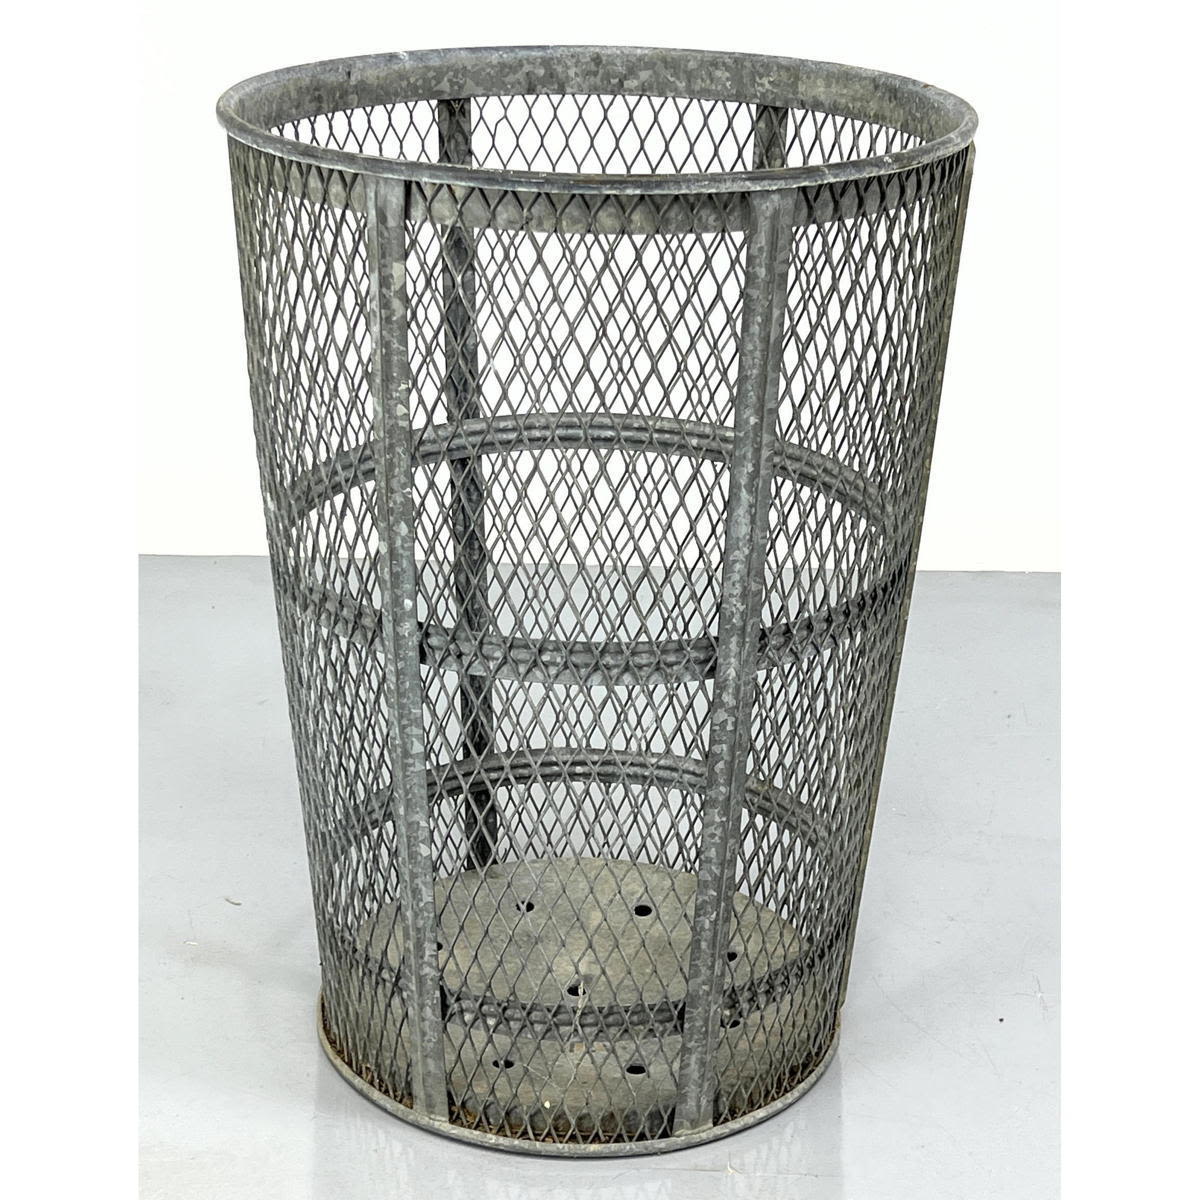 Vintage Wire Mesh Trash Can. Waste